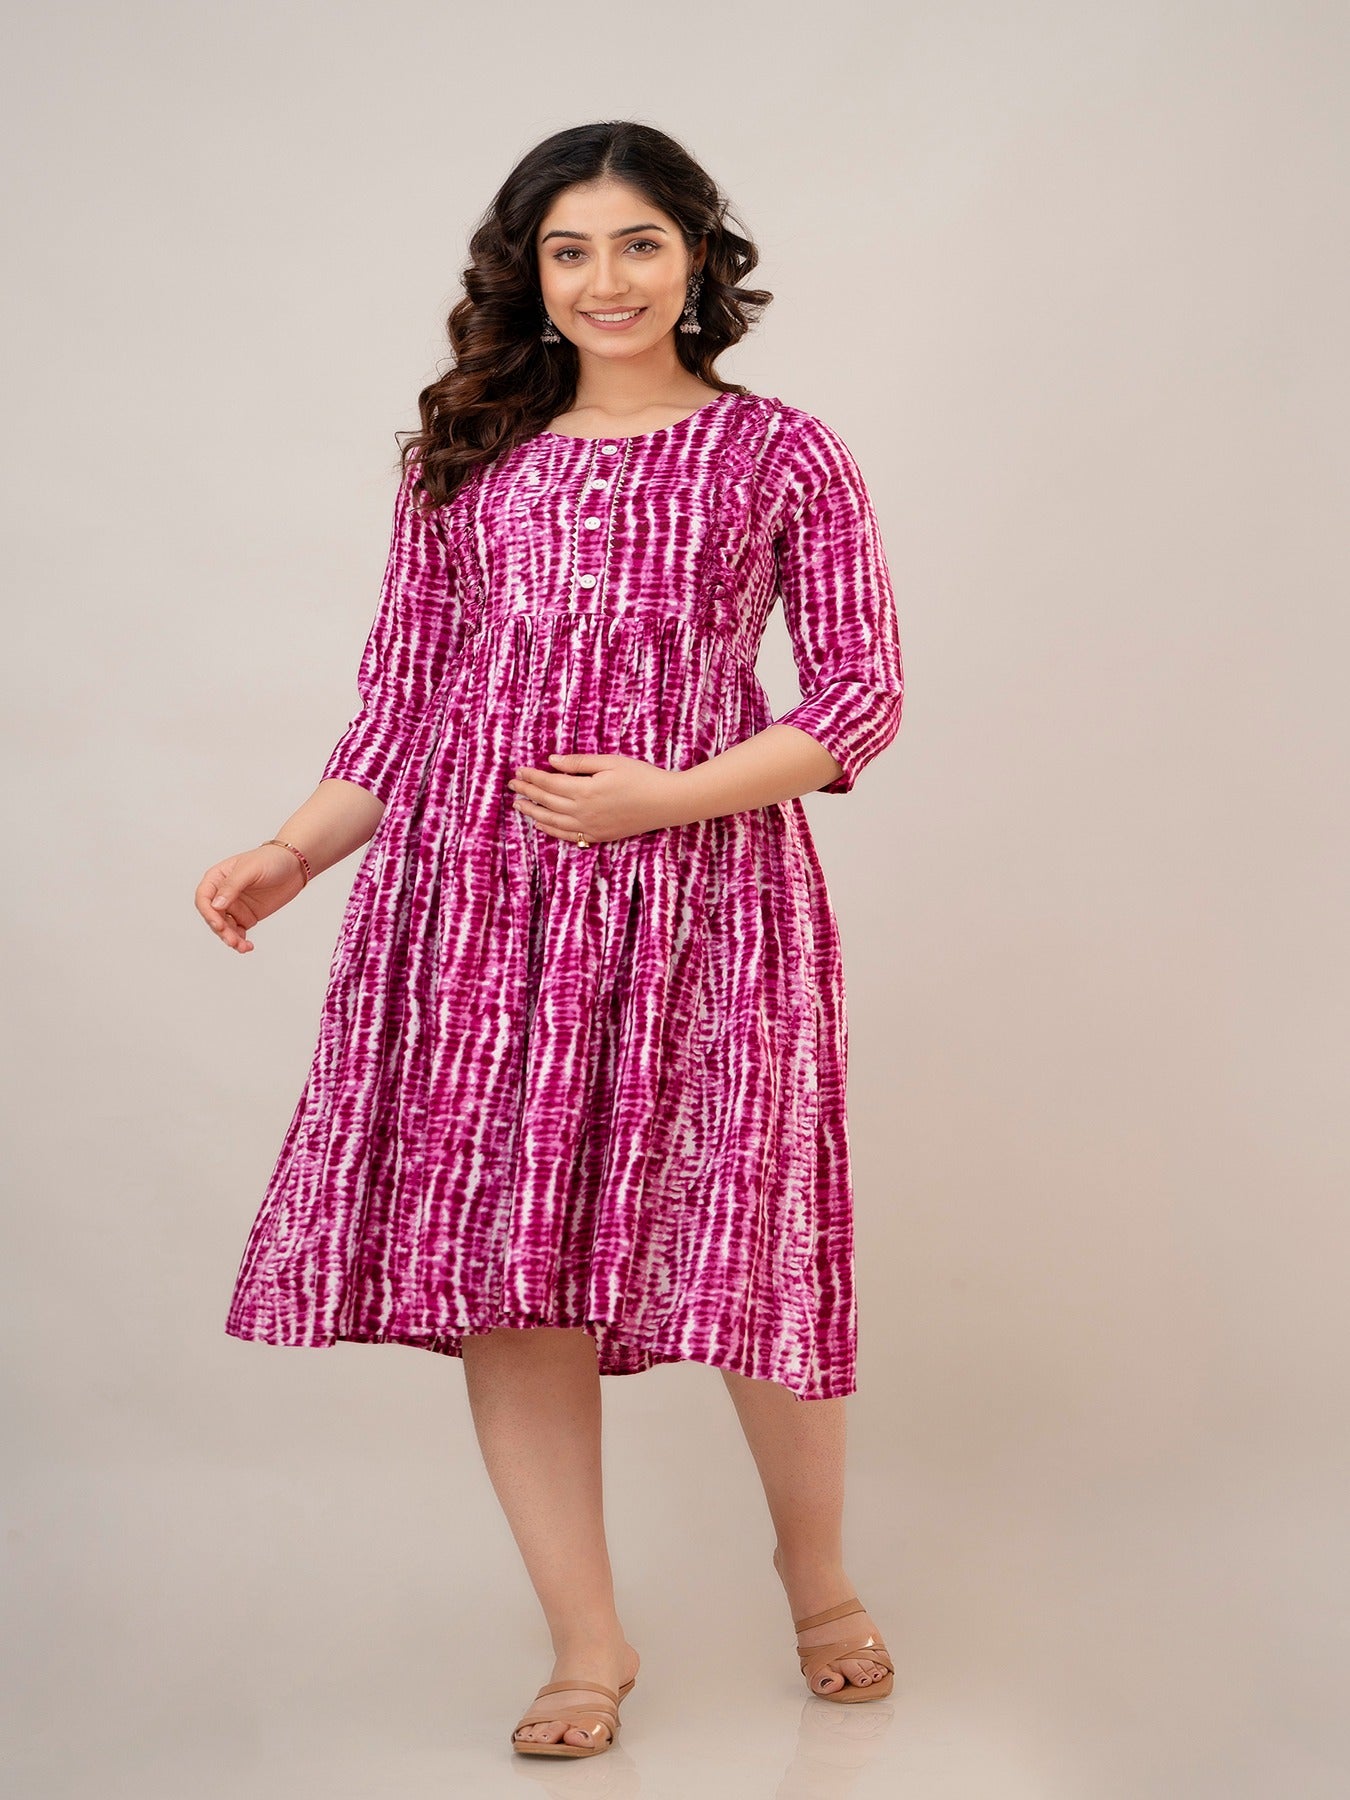 Women's Rayon Tie-Dye Fit and Flared Maternity and Feeding Kurta